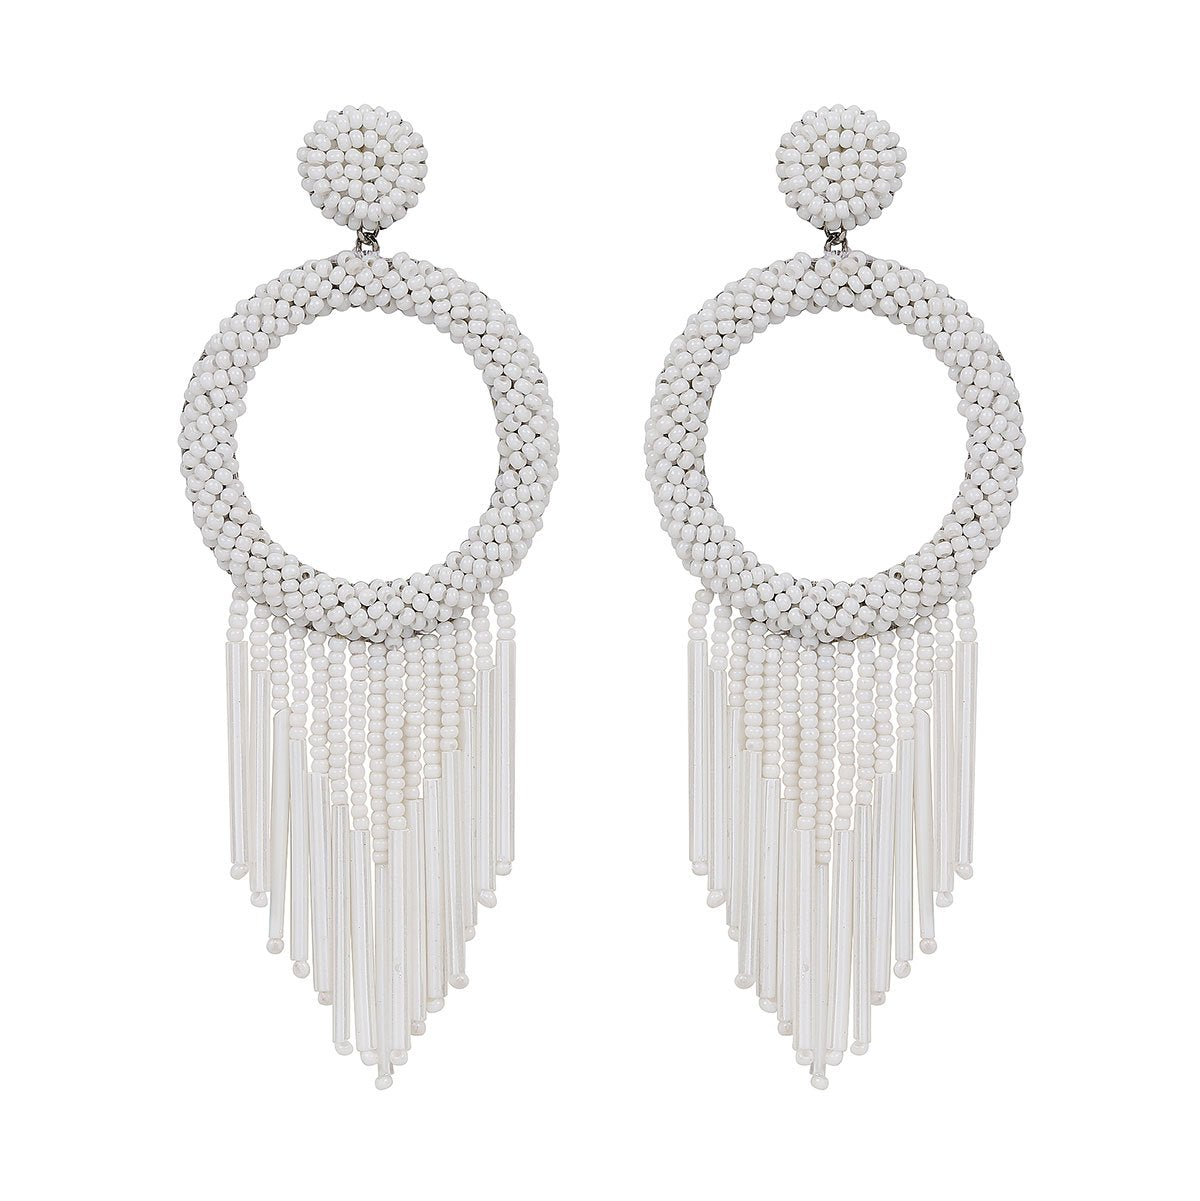 Unique Lightweight Hand Embroidered White Earrings by Deepa Gurnani